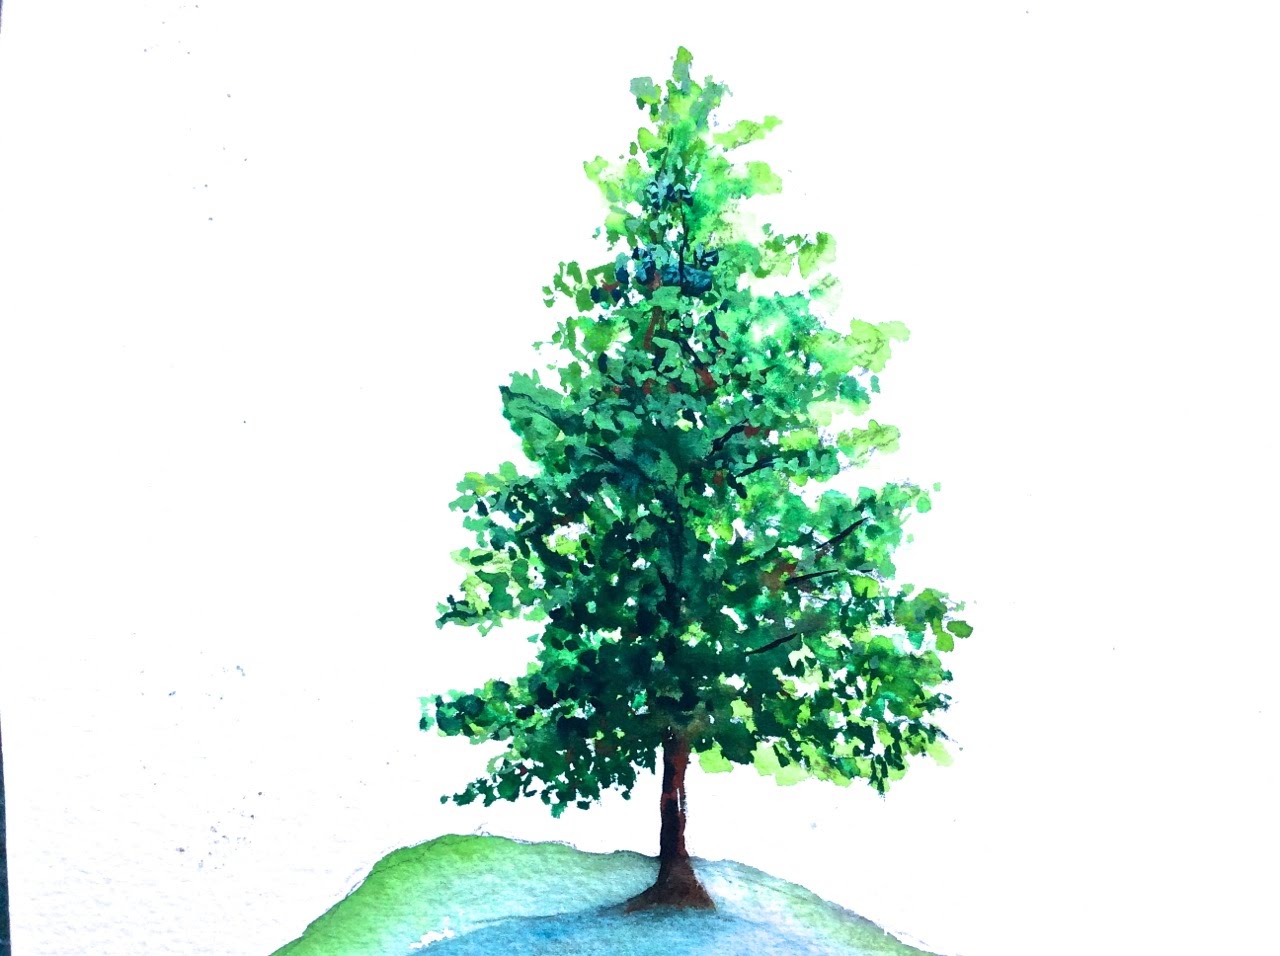 On YouTube: Tutorial how to paint a Pine Tree with Watercolor, fast and easy